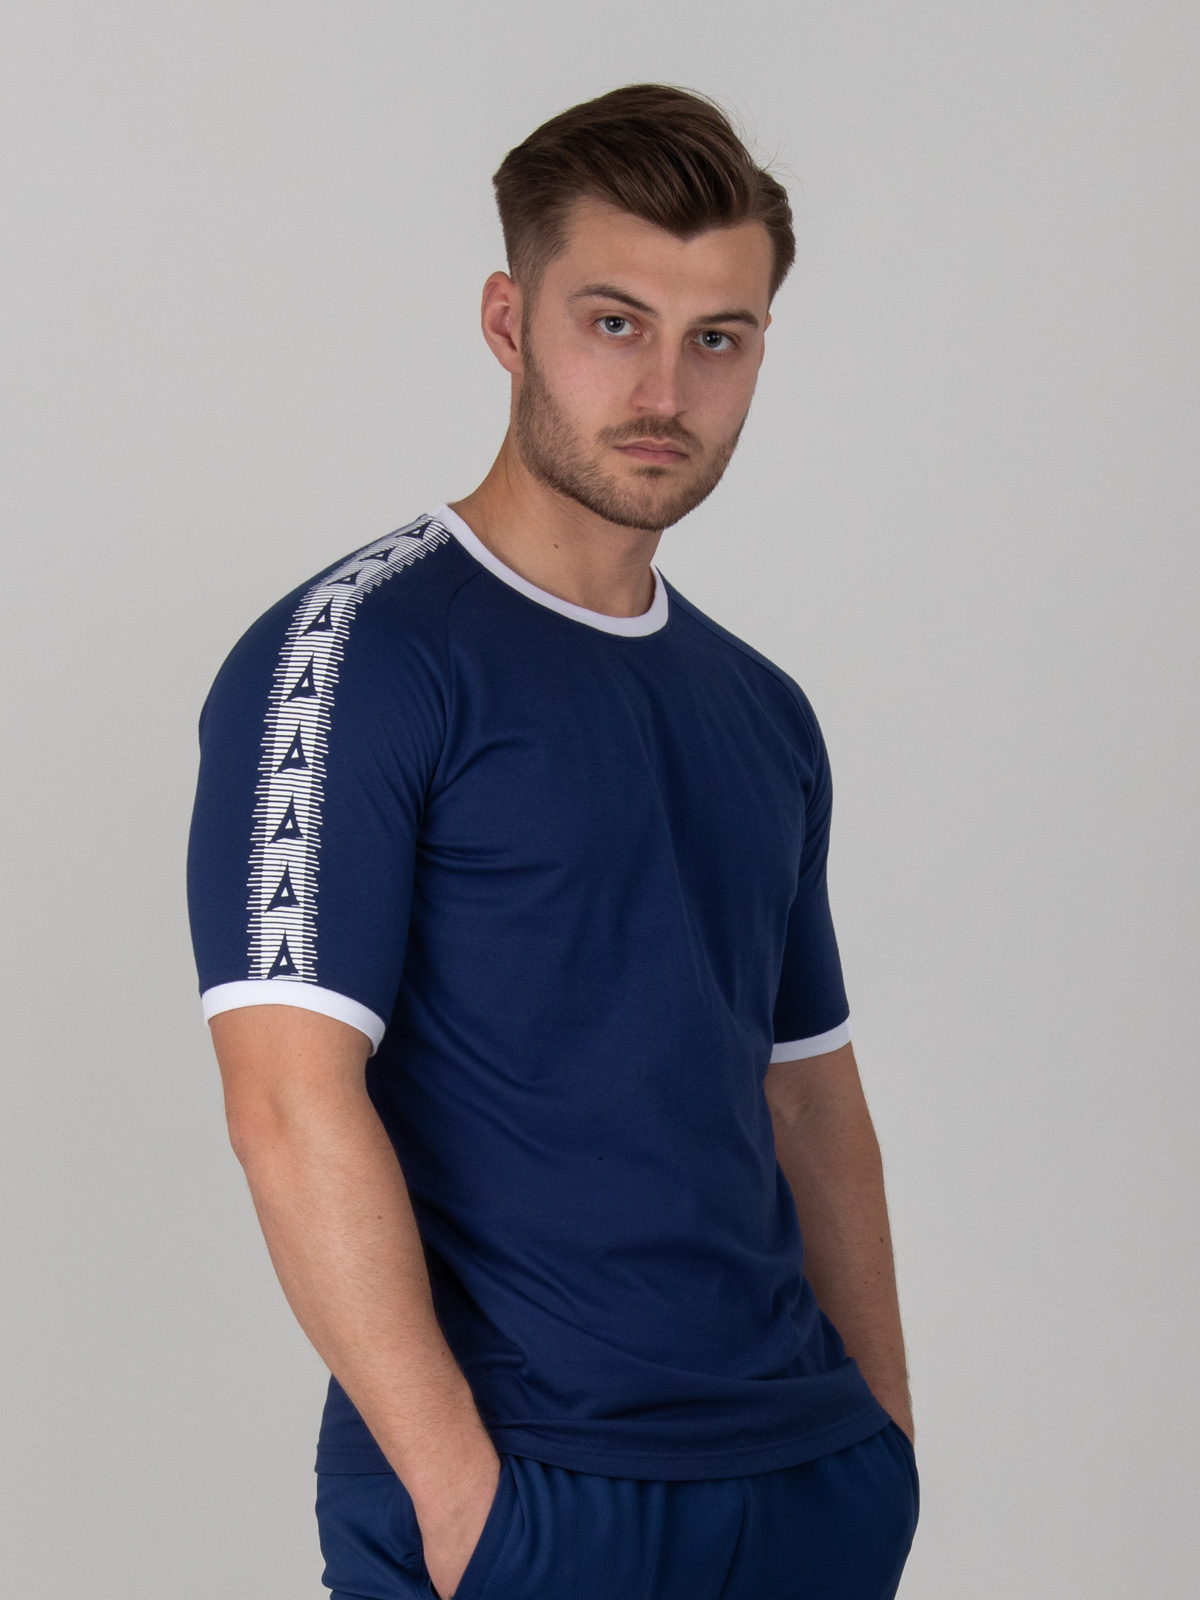 a man is wearing a navy t-shirt with white trim on the collar and sleeves